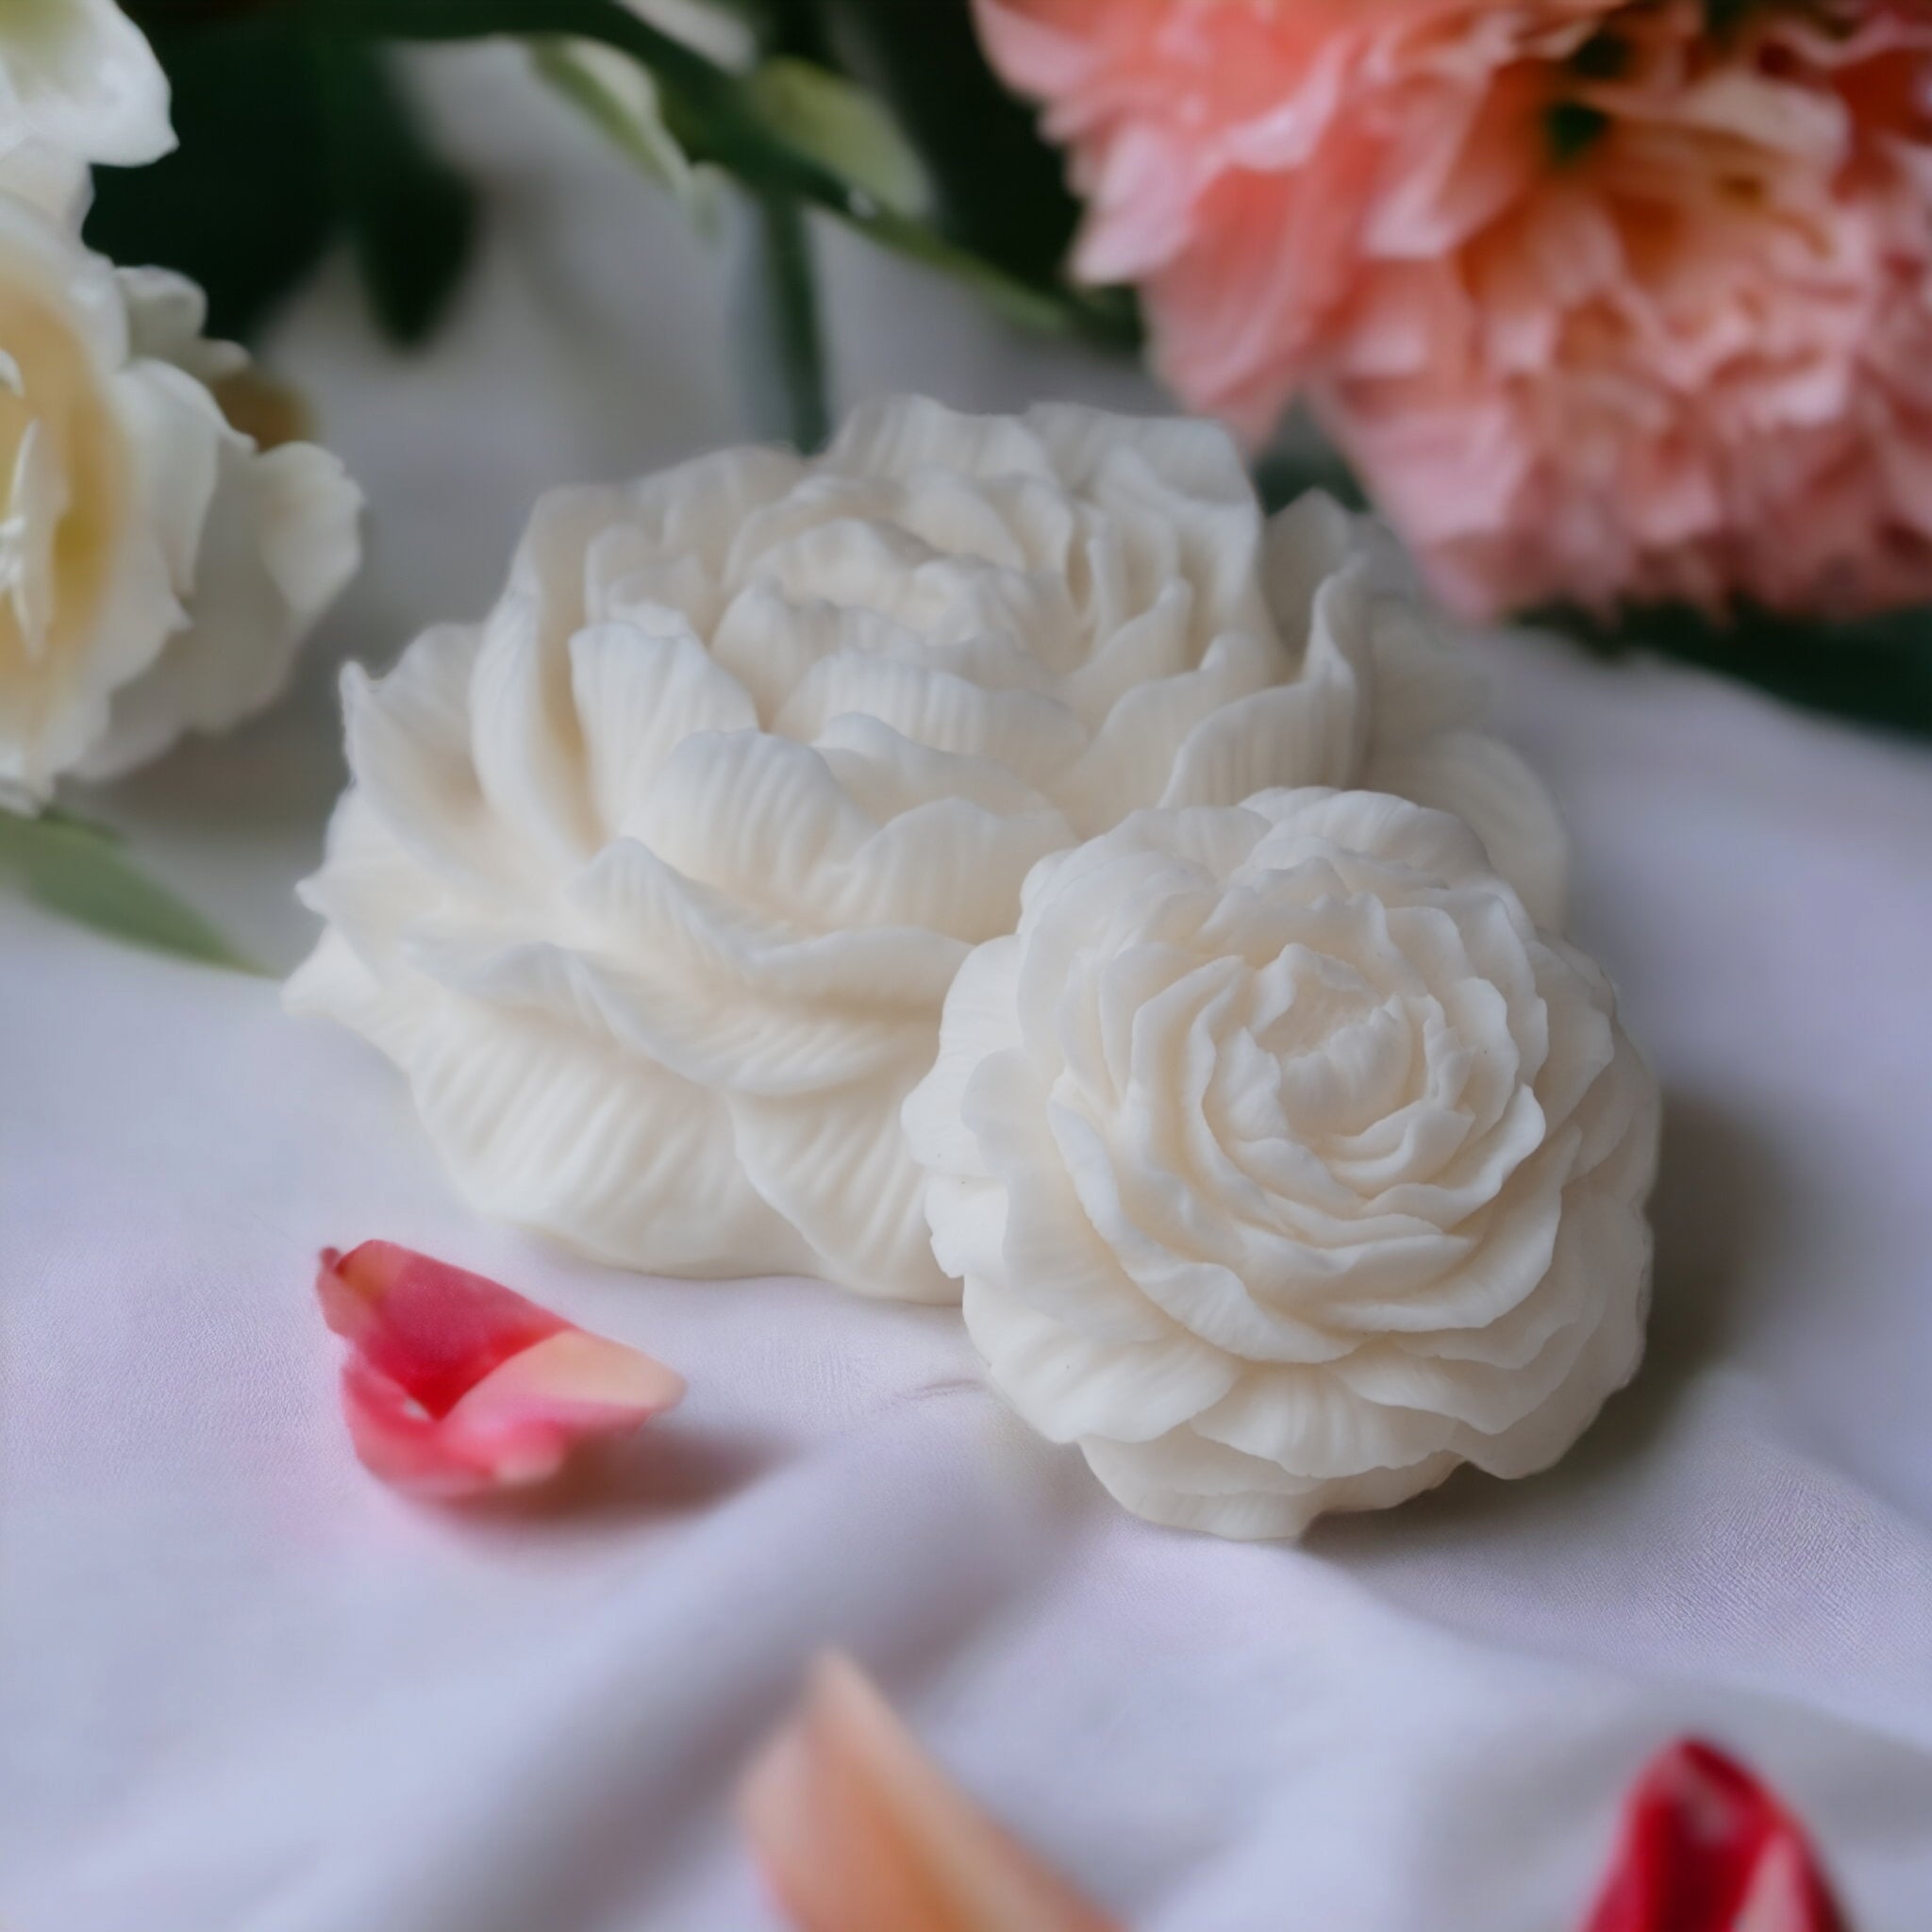 Rose Bouquet Candle Mold Silicone Valentine's Day Candle Mold